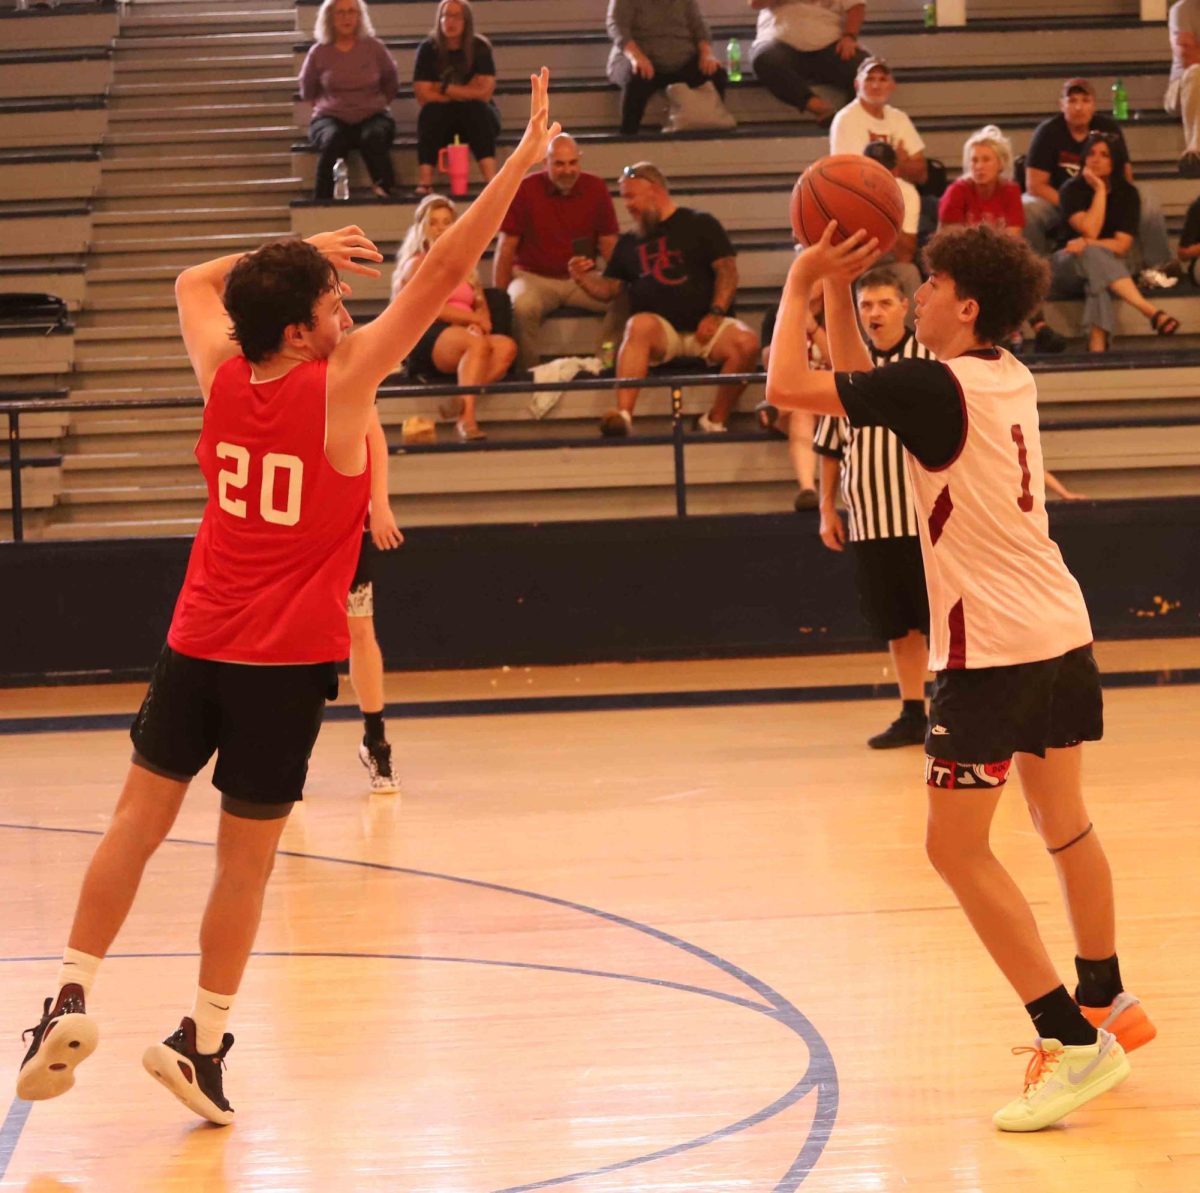 Hayden Grace, pictured in action earlier this summer, scored 21 points Friday as Harlan County rolled to a win over Clinton County in a freshman scrimmage.